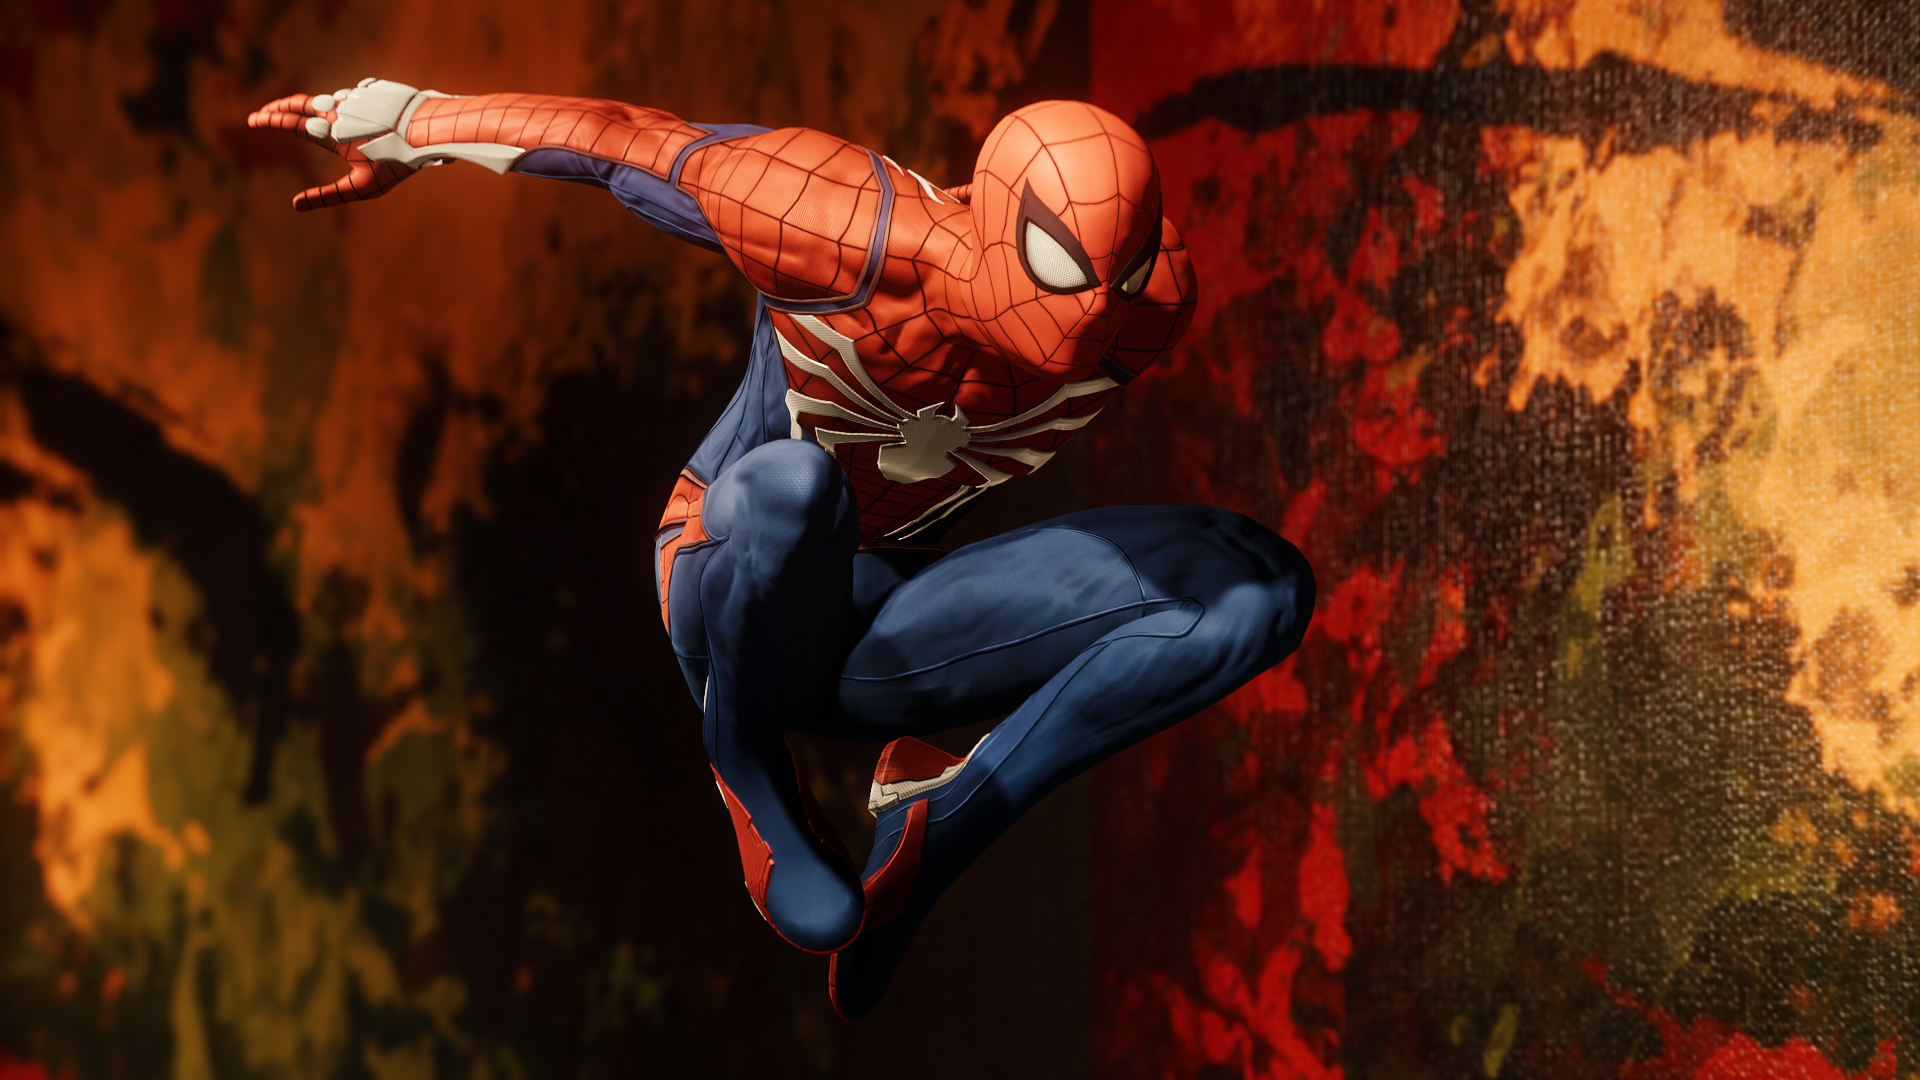 Hd Spiderman Game Hd Games 4k Wallpapers Images Backgrounds